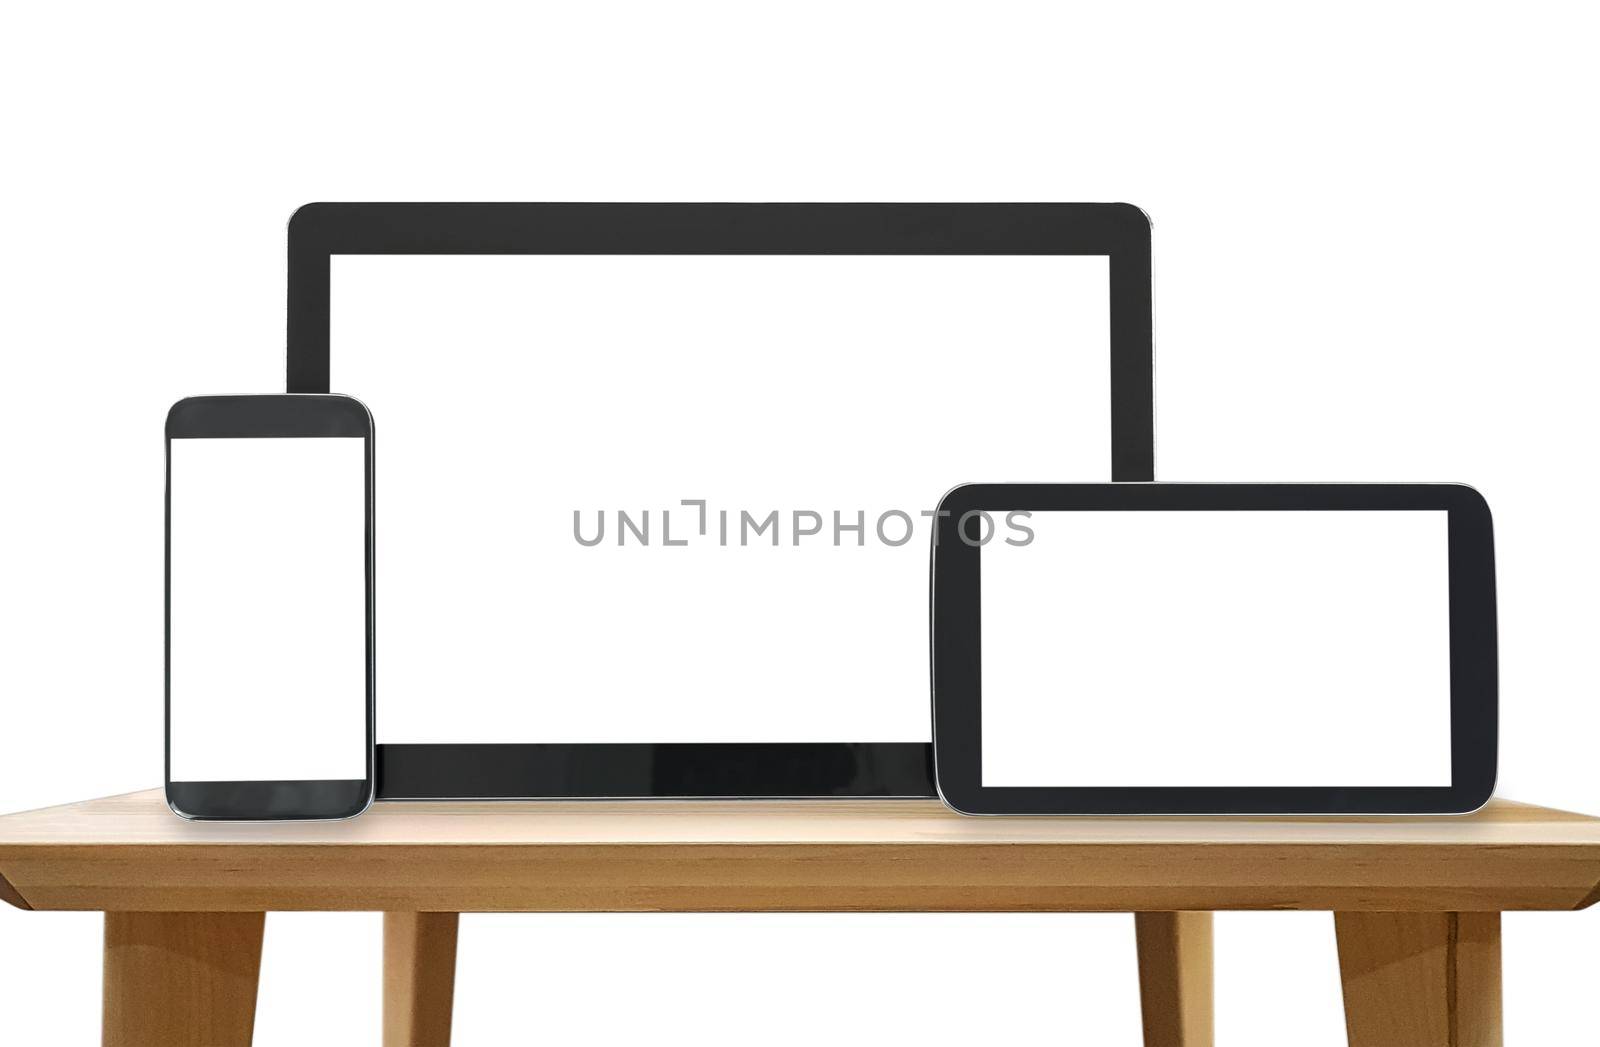 Template for responsive design presentation - digital tablet and smartphone in various orientation on a wooden table